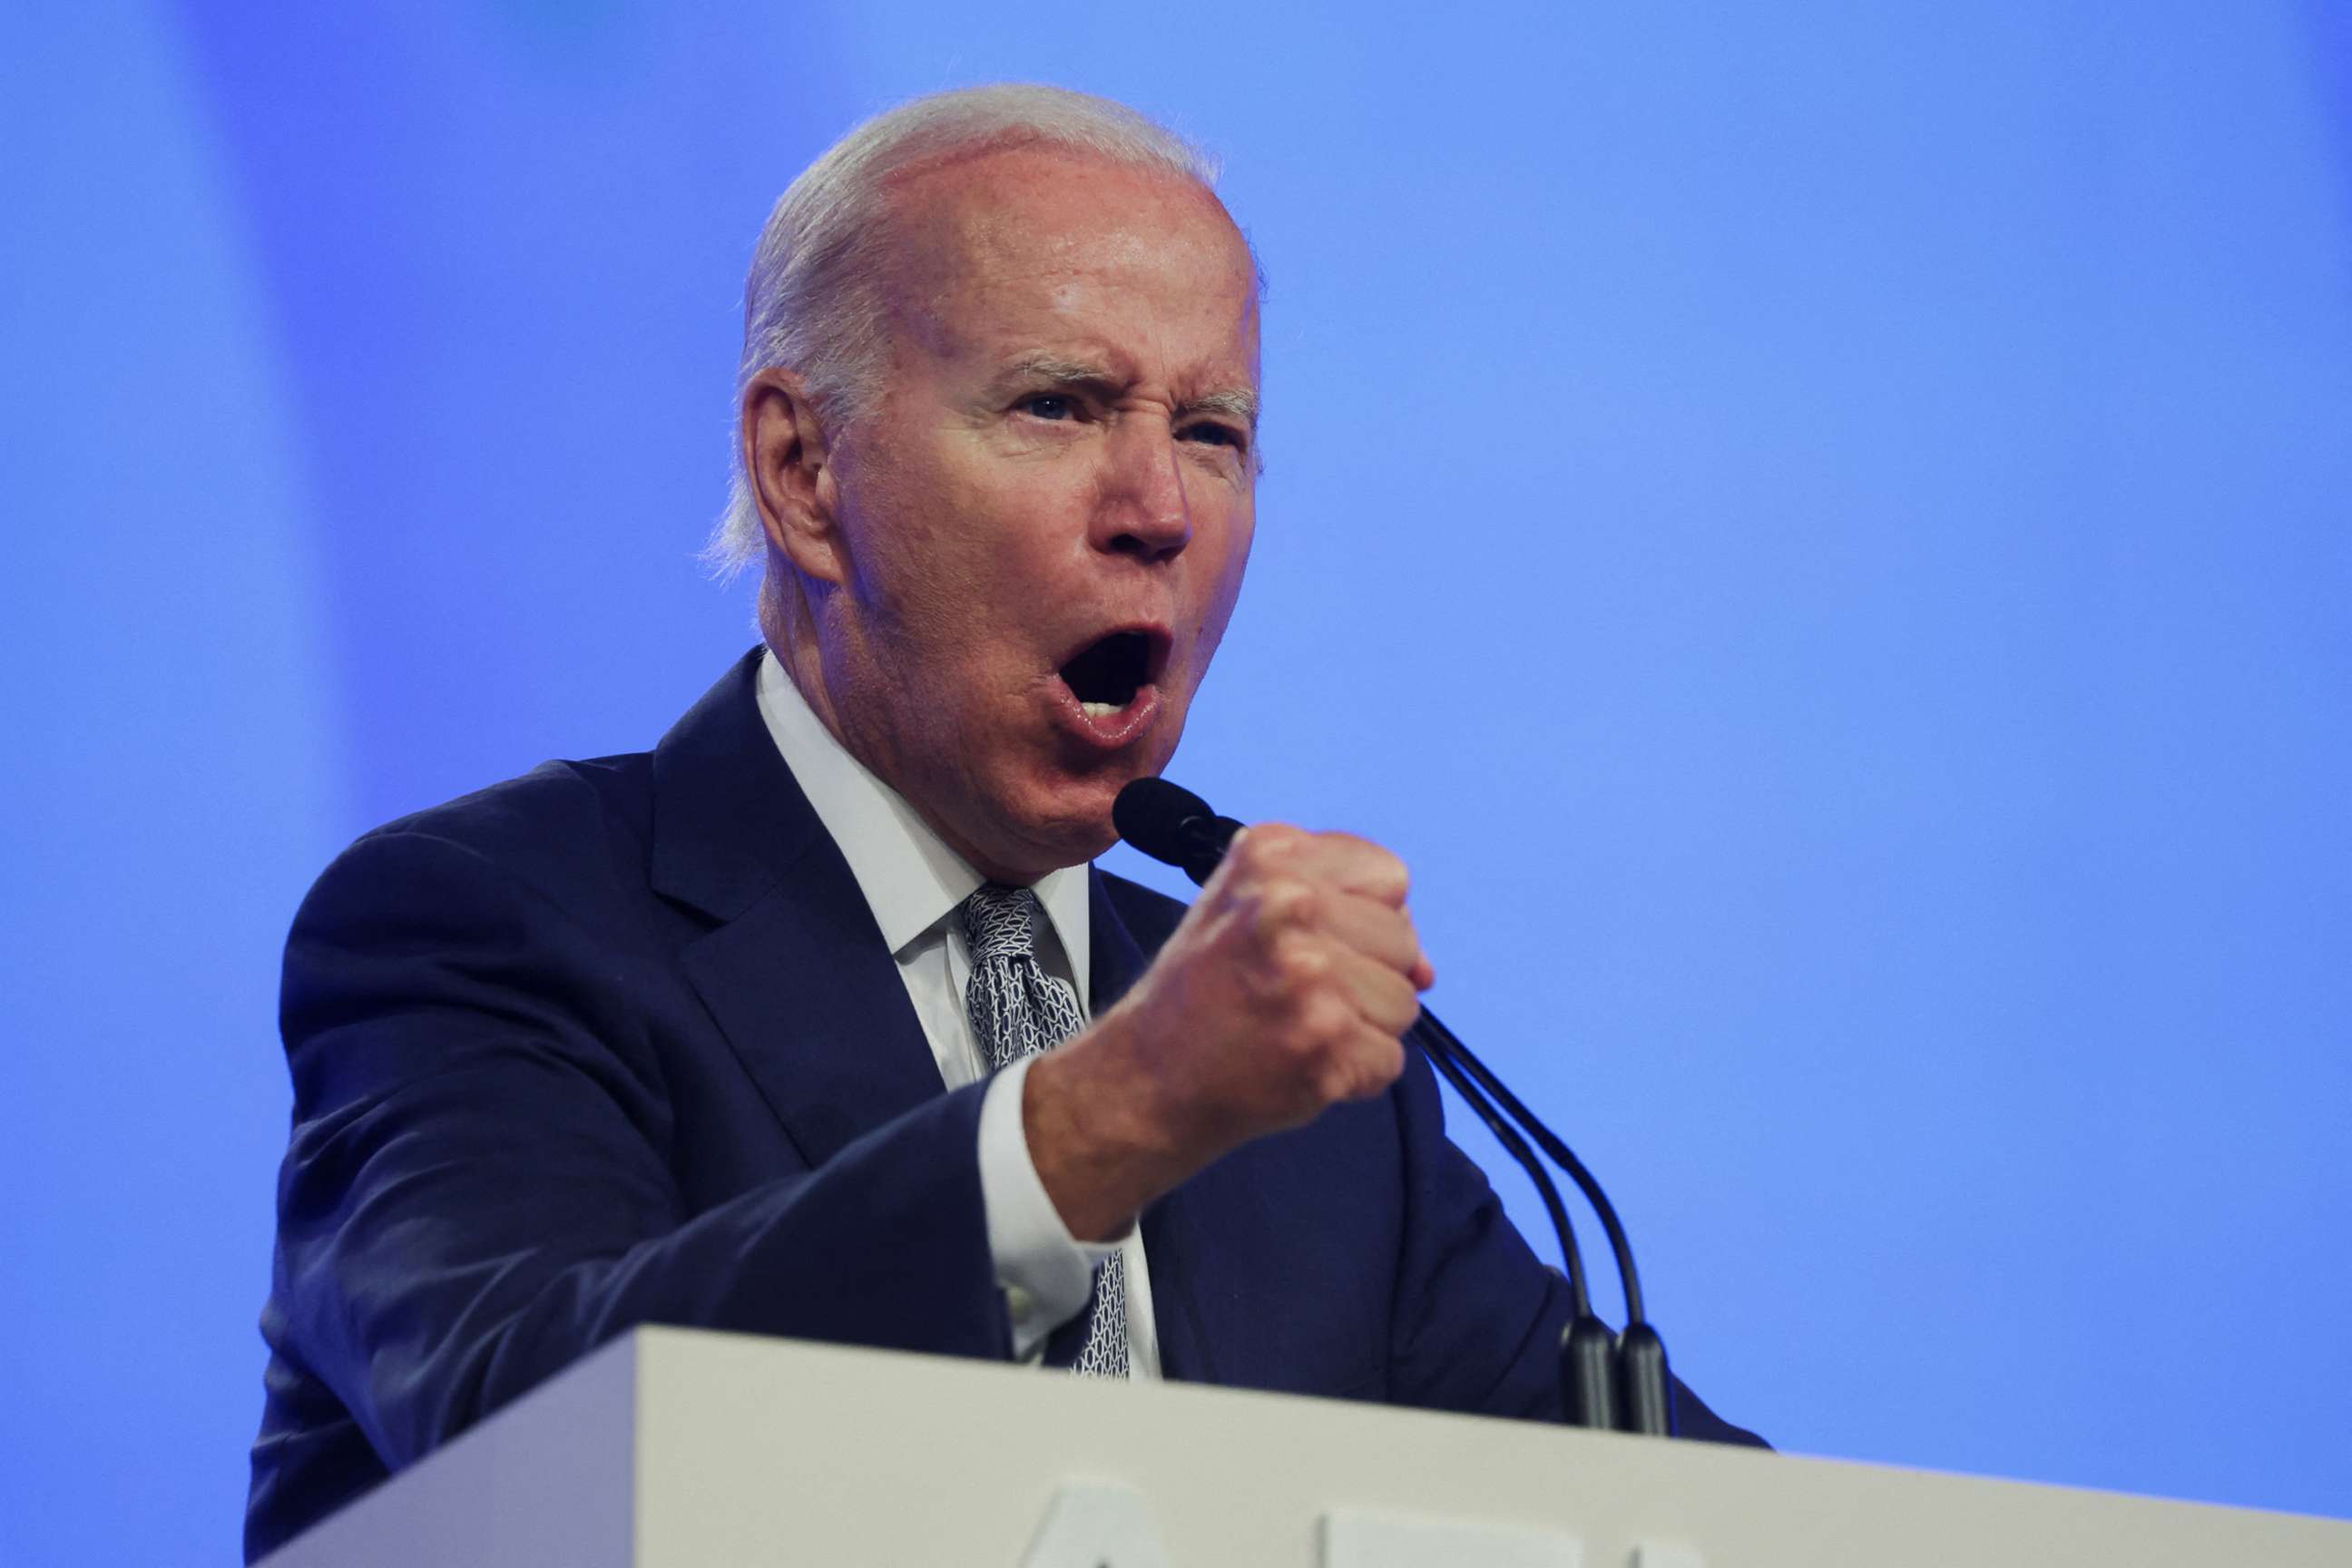 PHOTO: President Joe Biden delivers remarks at the 29th AFL-CIO Quadrennial Constitutional Convention at the Pennsylvania Convention Center in Philadelphia, June 14, 2022.